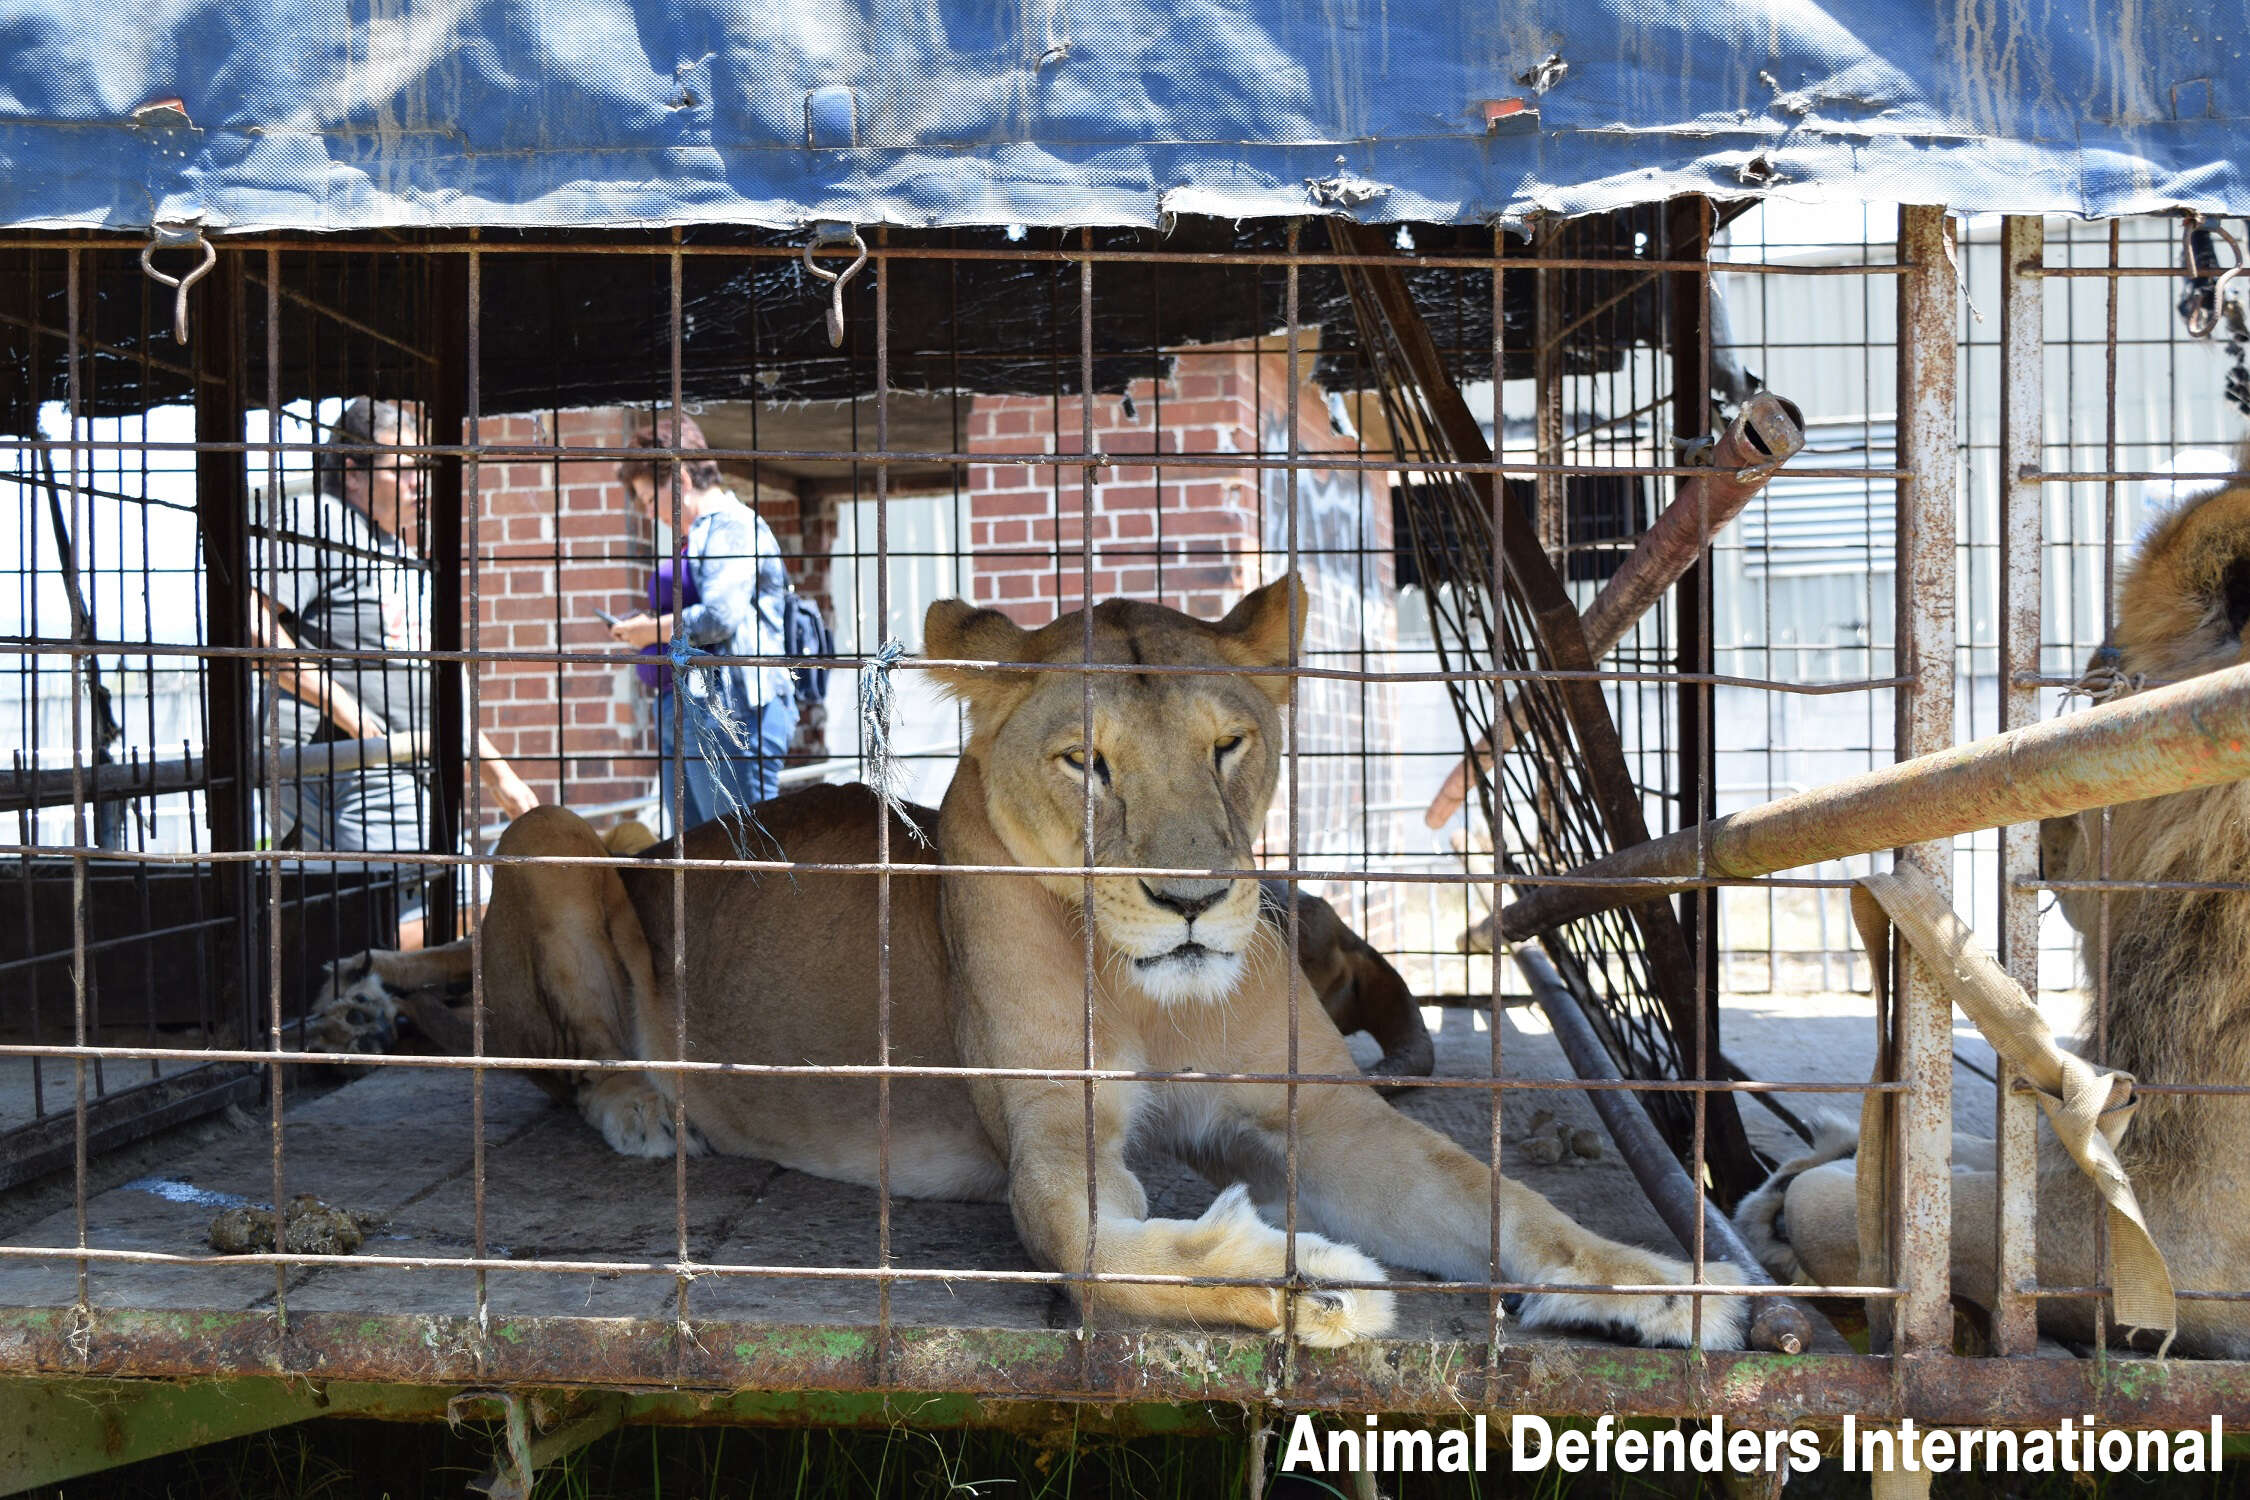 Circus lion stuck in tiny cage